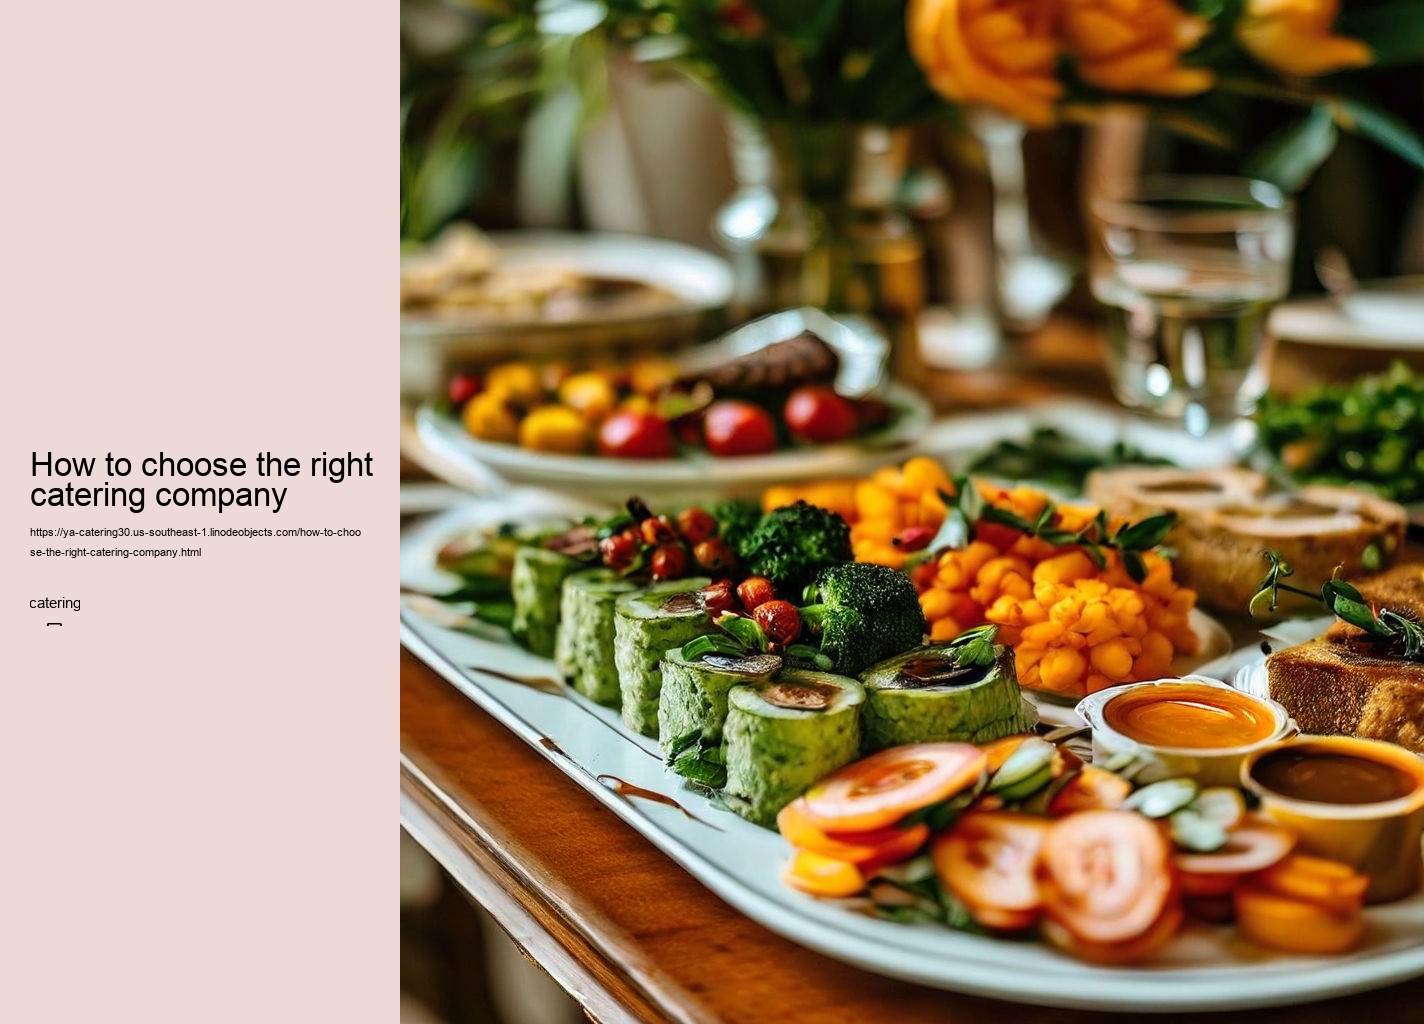 How to choose the right catering company